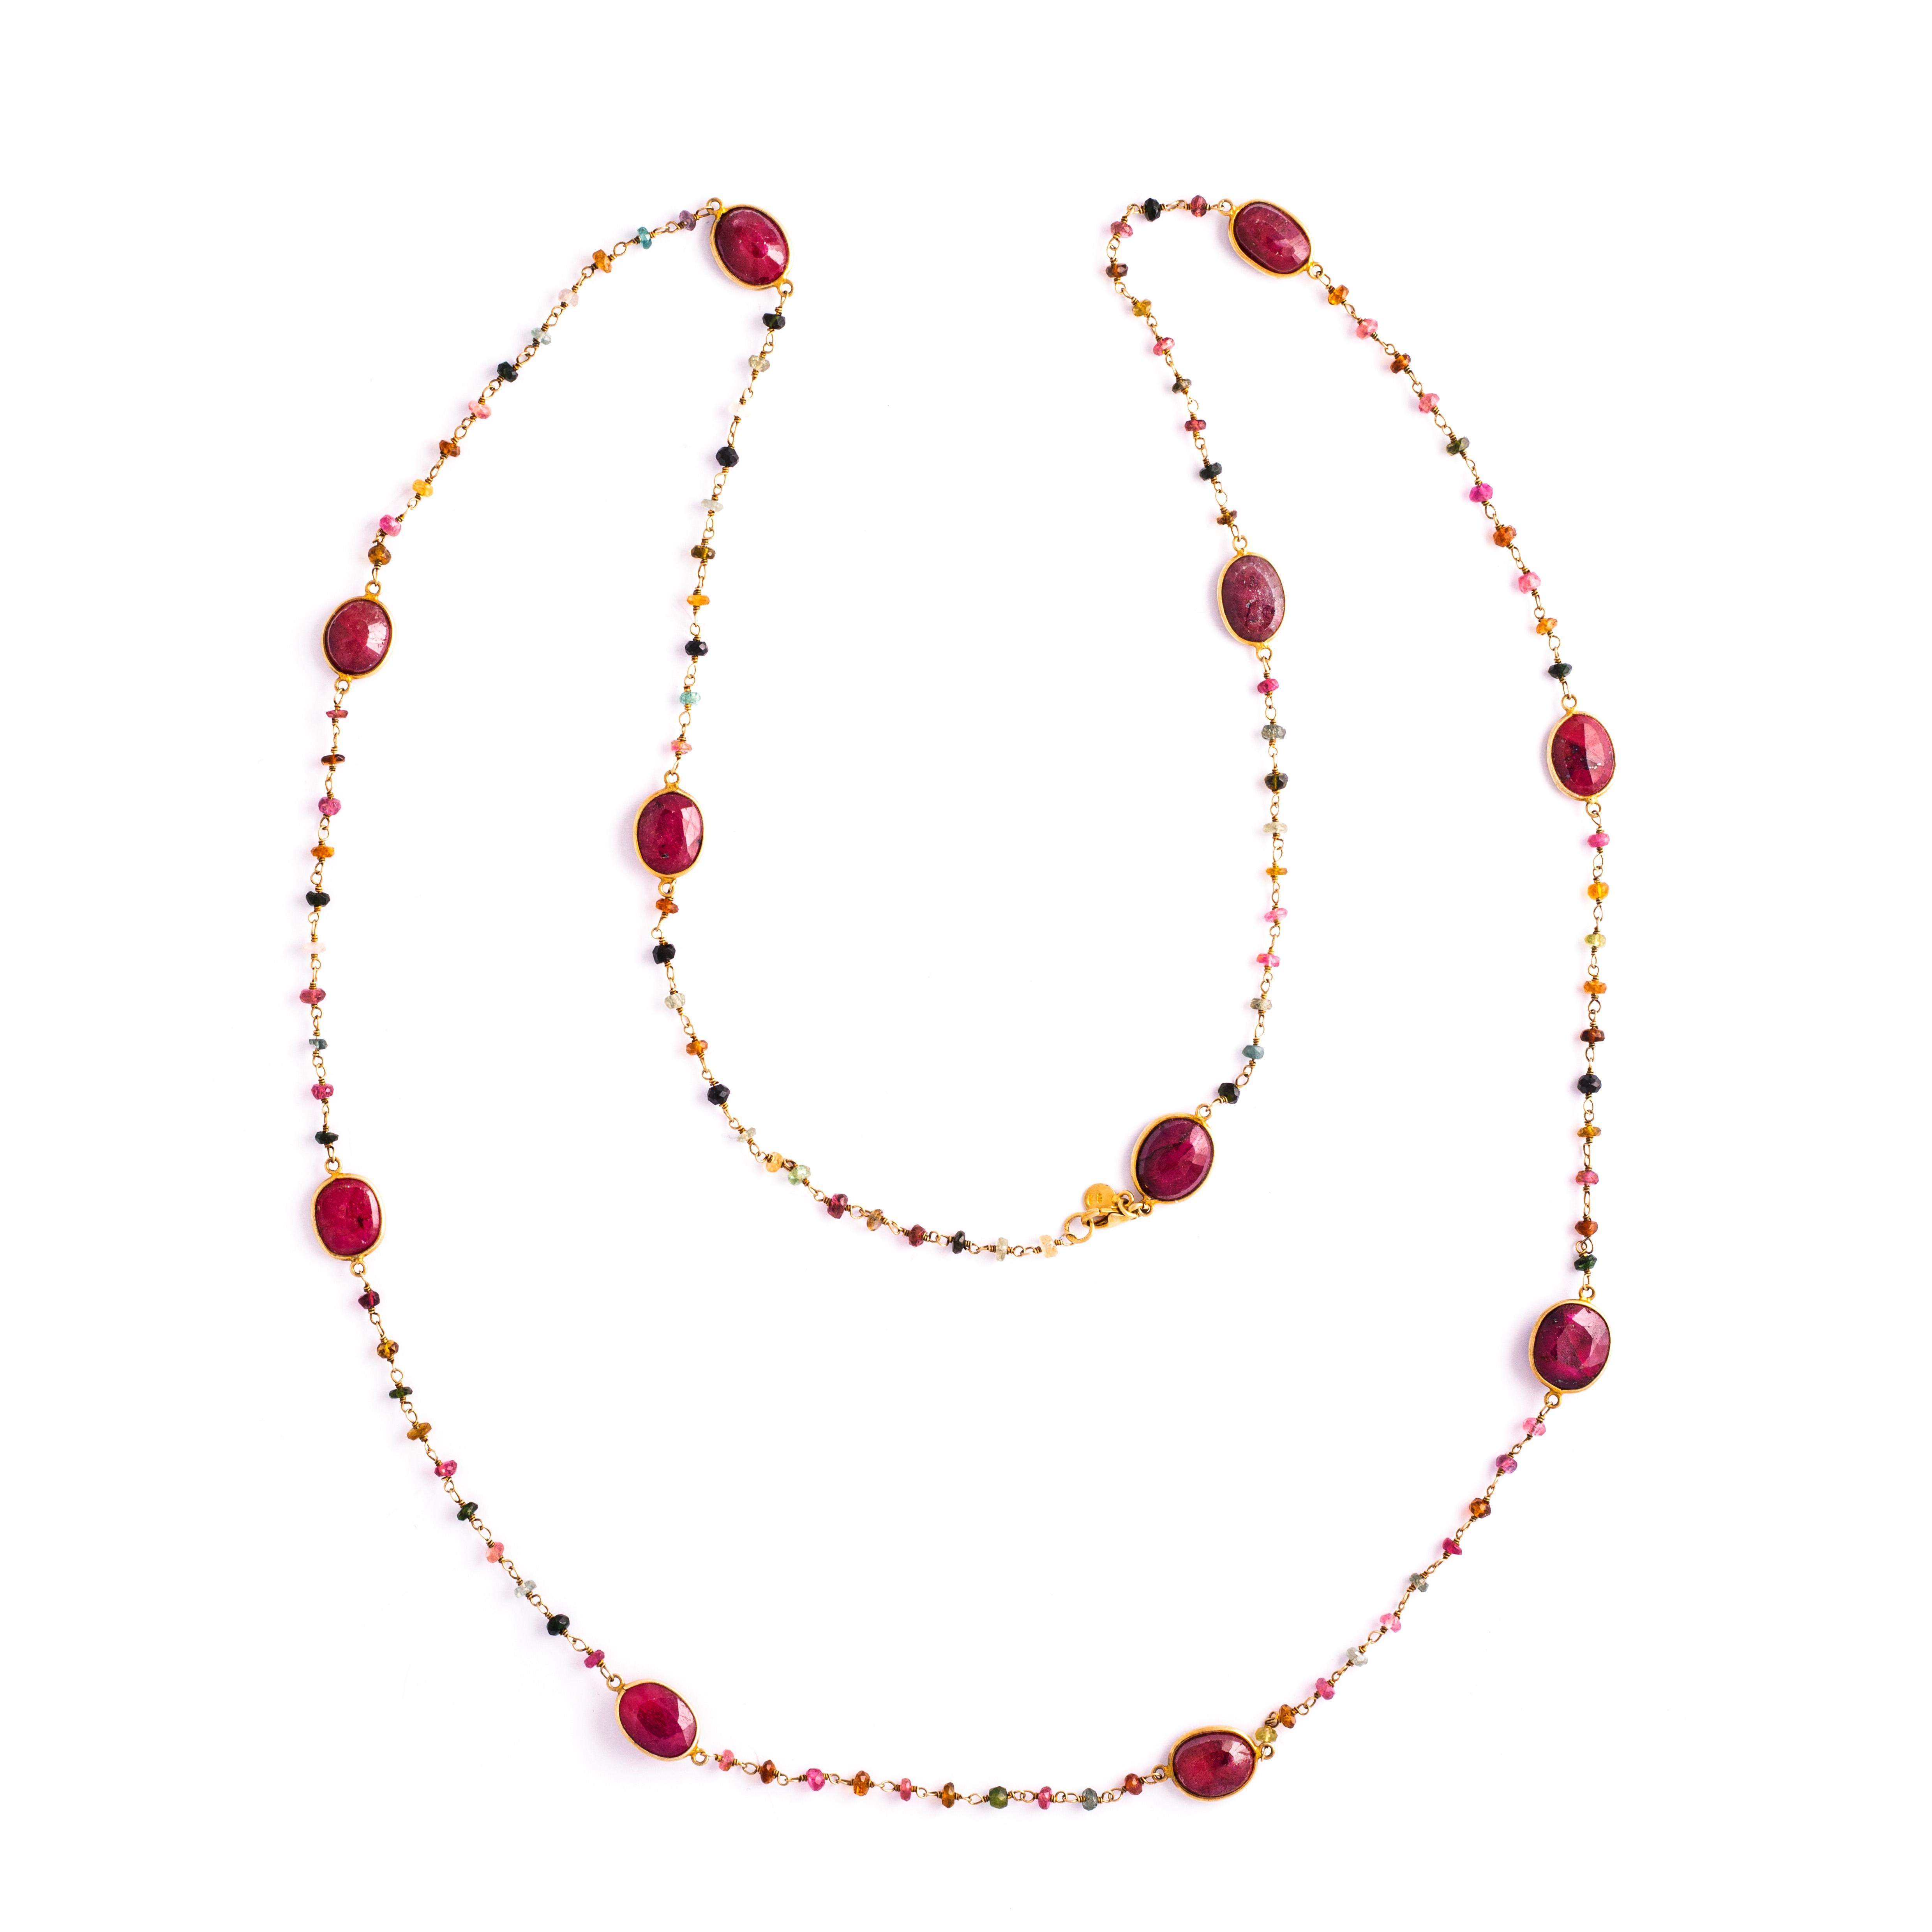 Sautoir Ruby and Precious Stones on Silver 925 Necklace.

Length: 43.31 inches (110.00 centimeters).
Total weight: 31.18 grams